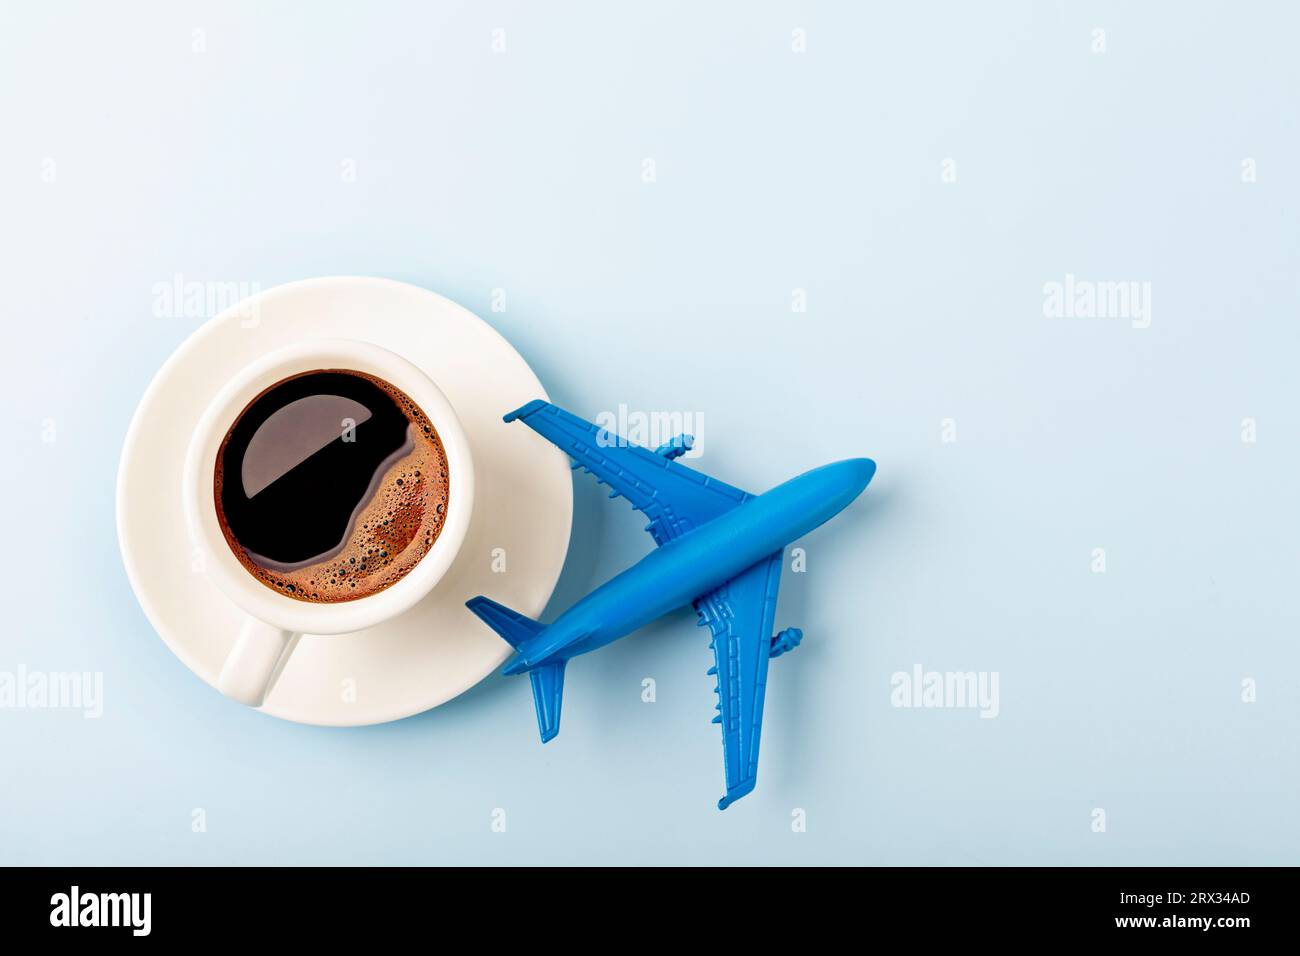 coffee with airplane model on blue background. Stock Photo